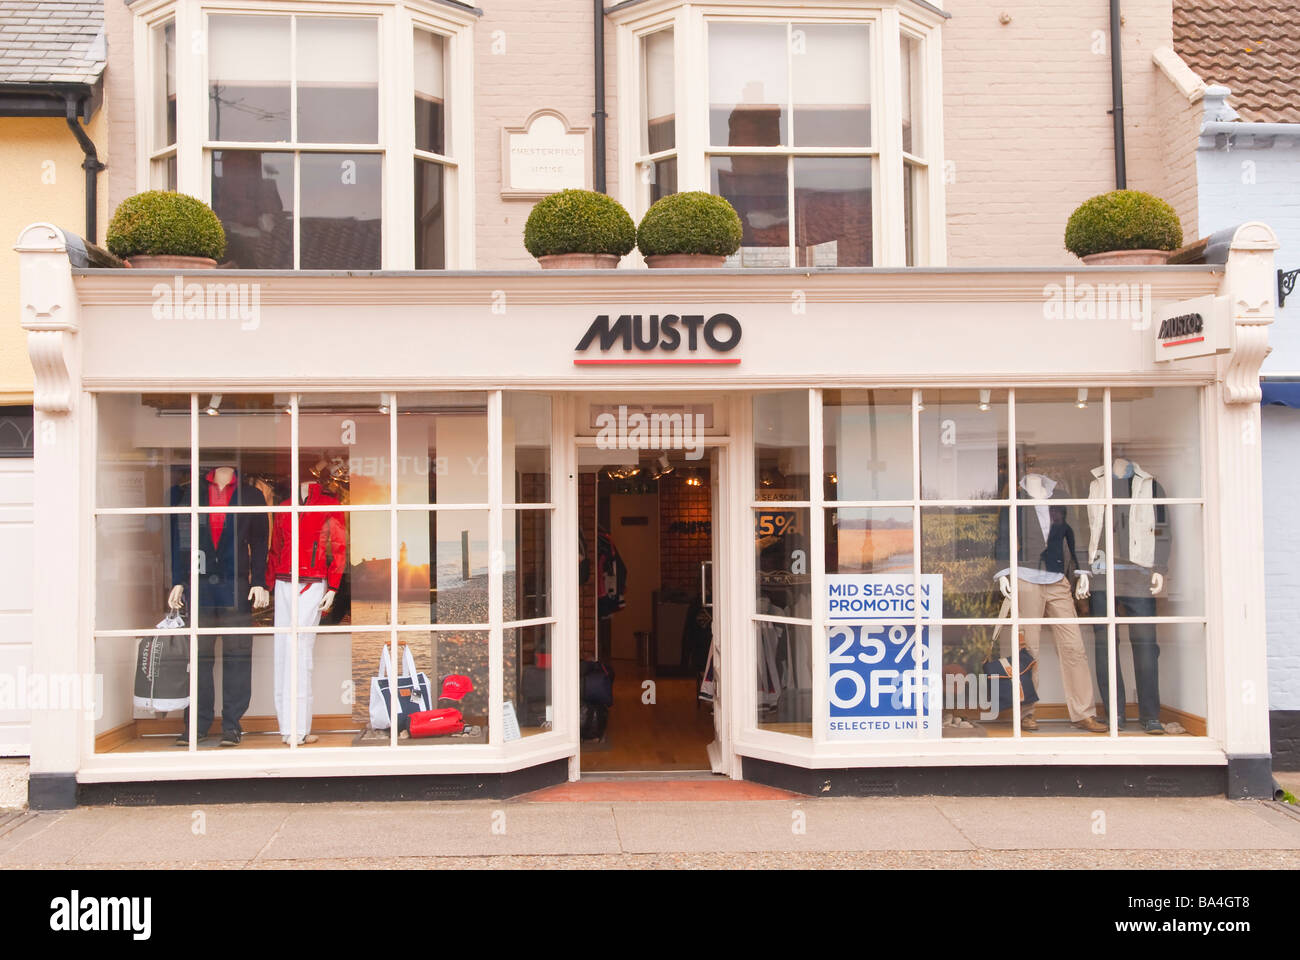 Musto shop store in Aldeburgh,Suffolk,Uk selling clothes Stock Photo - Alamy